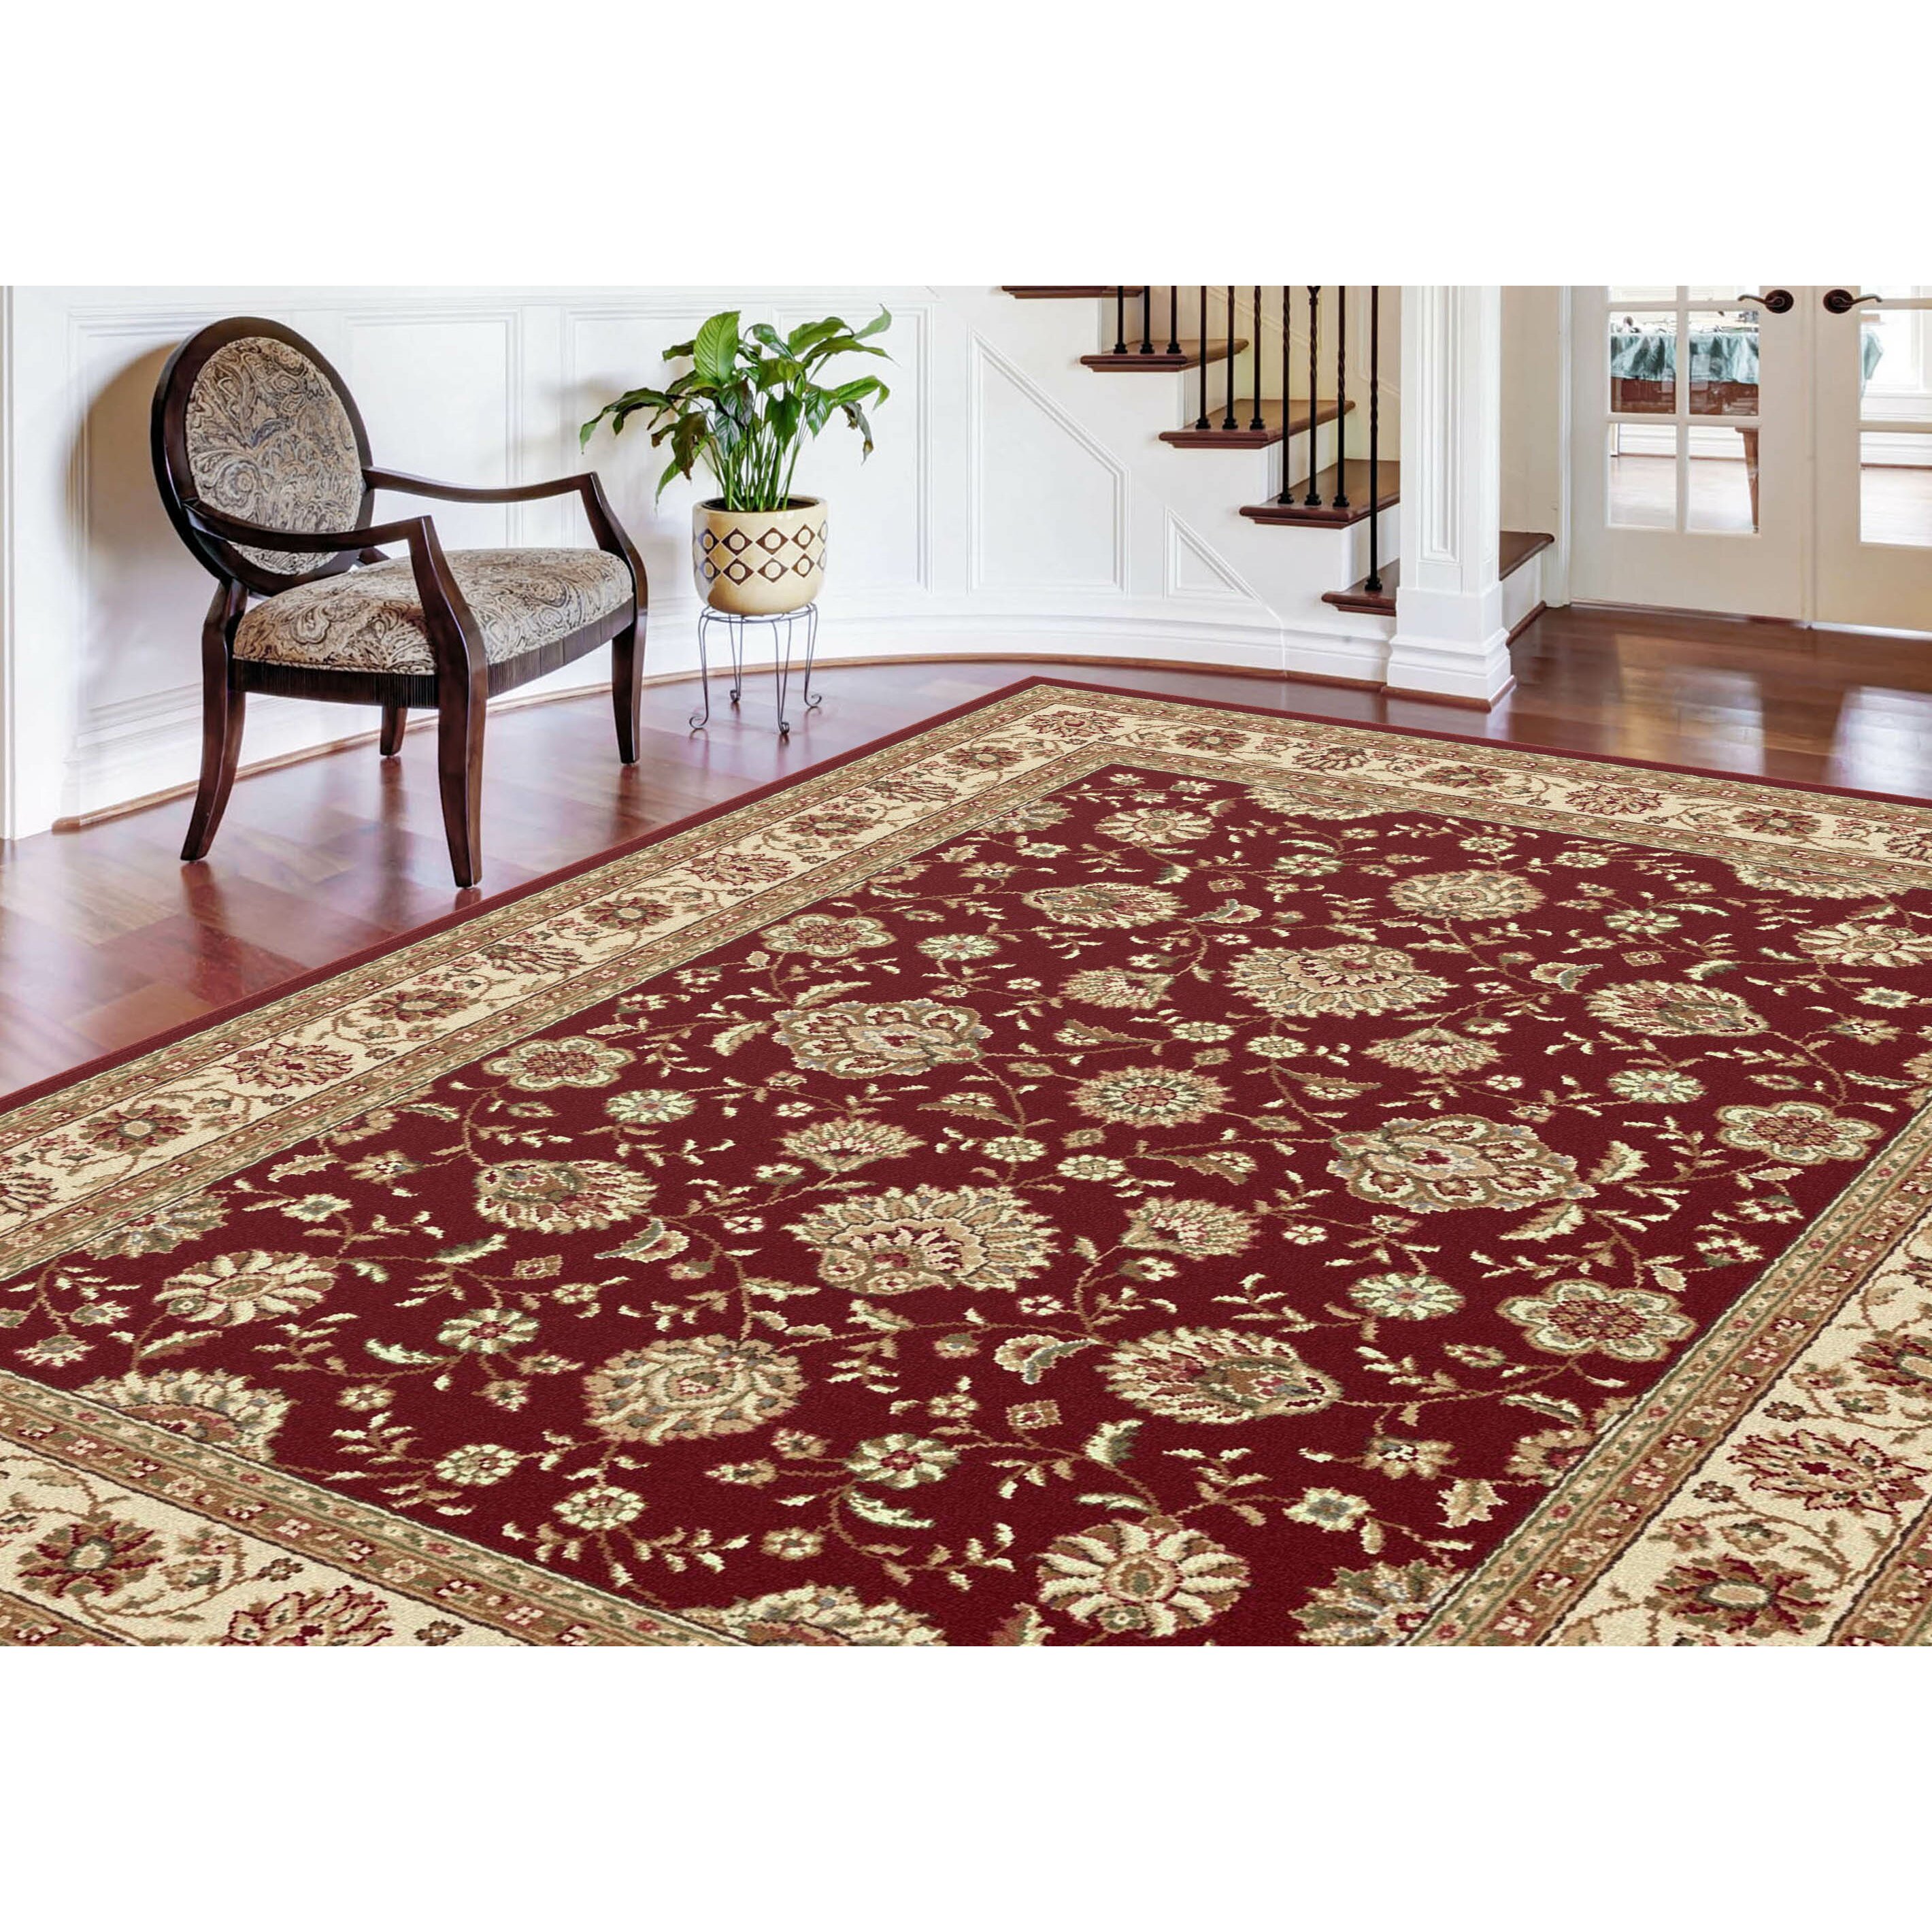 light blue rug with red